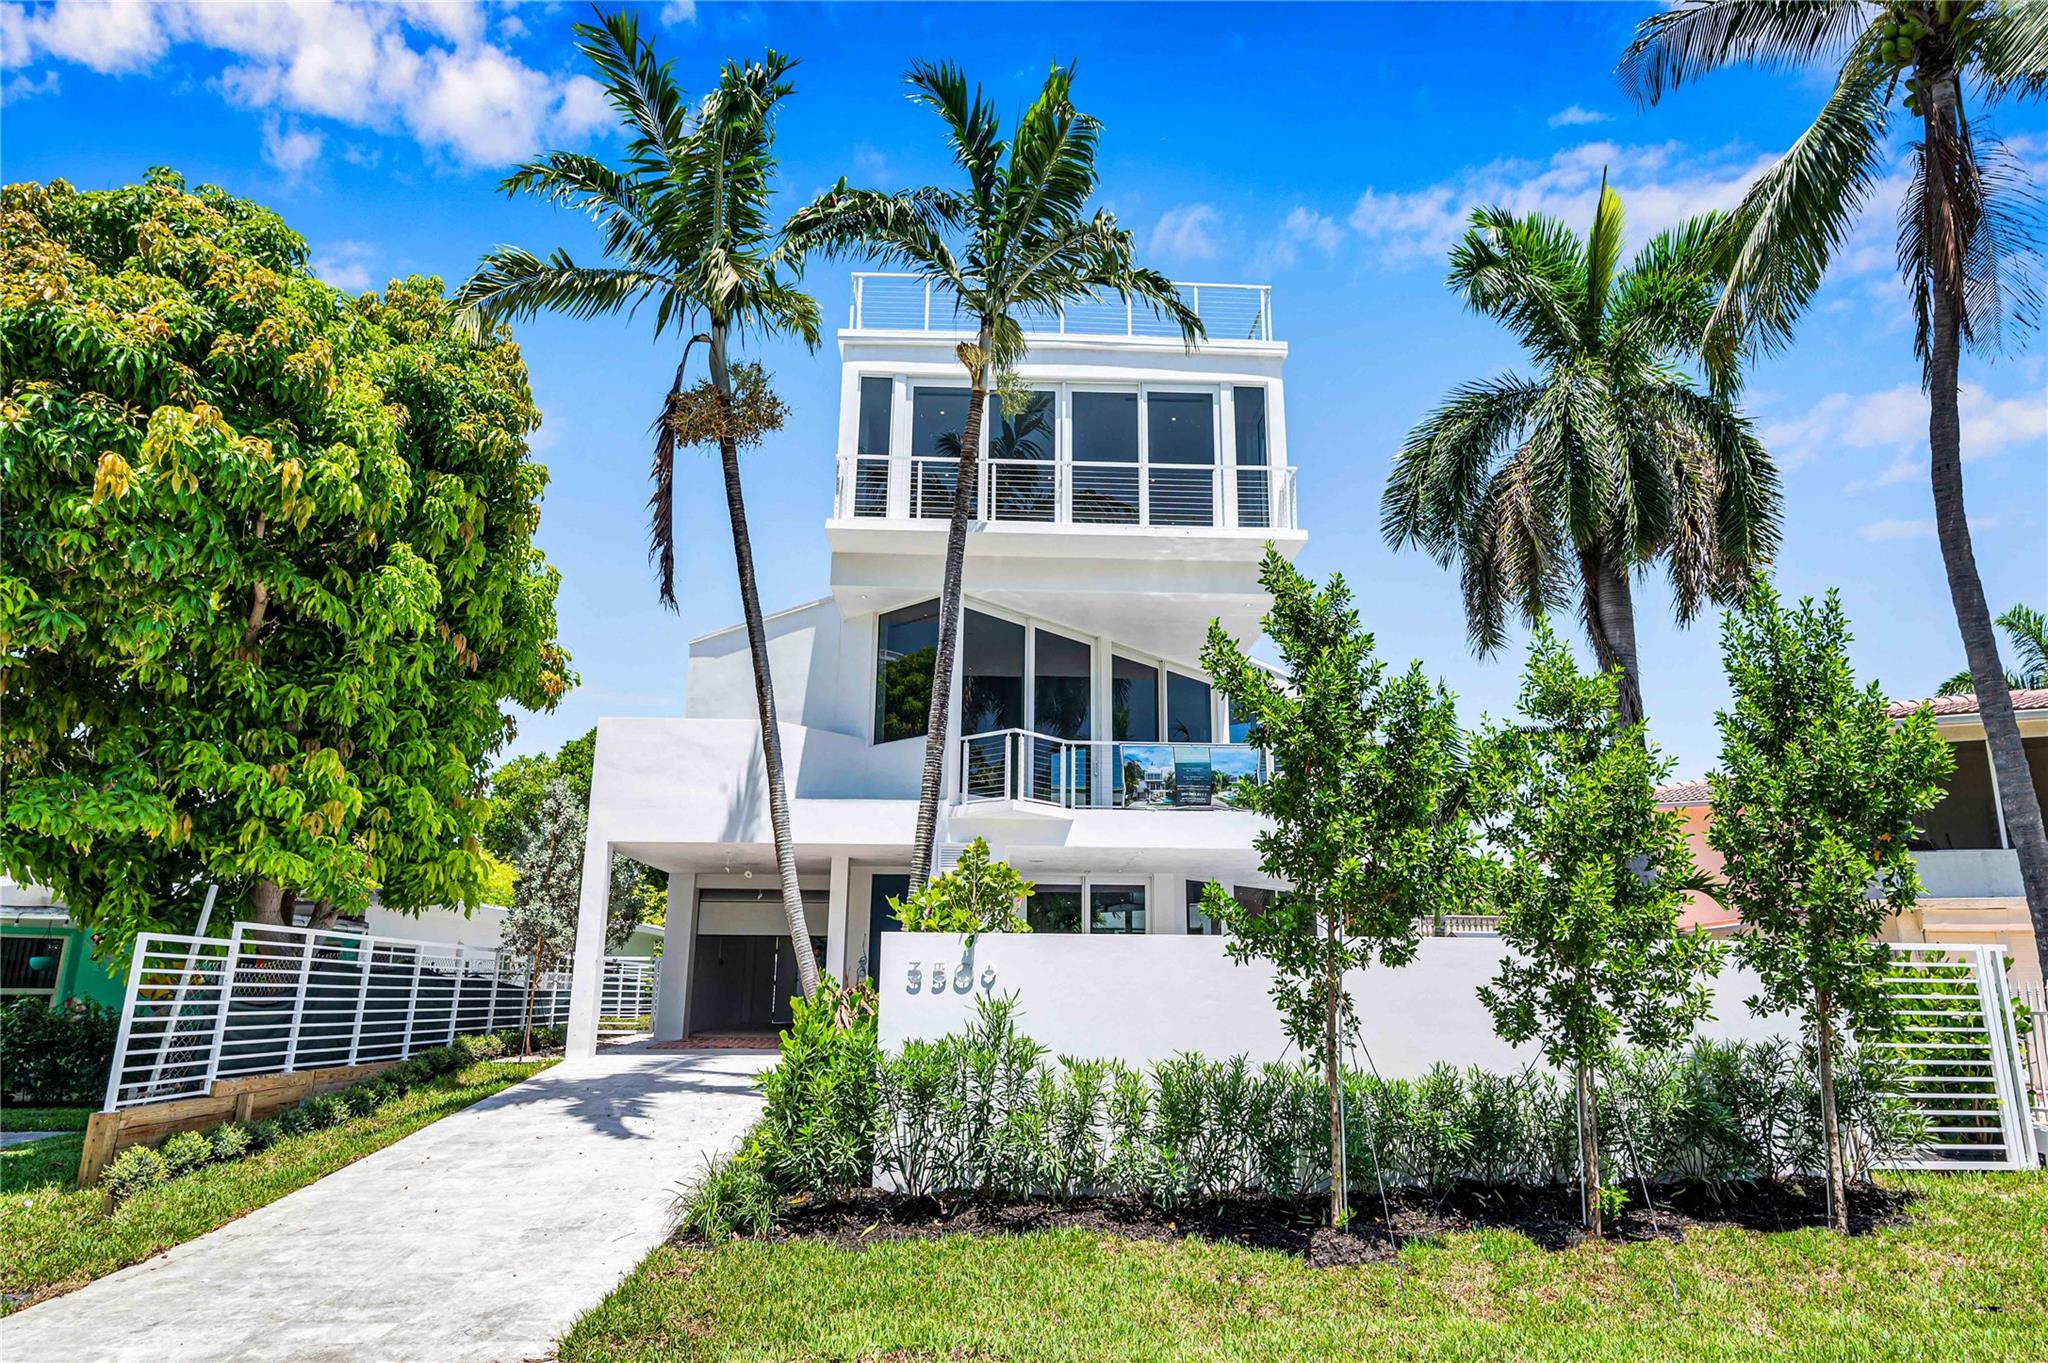 Here is an opportunity to live in a brand new ocean-facing home in the sought-after Lauderdale Beach neighborhood tucked away east of A1A. On a palm-shaded boulevard, this magnificent, glass walled house faces a beach side pocket park and the azure Atlantic. The entry level is for entertaining with a spacious family room that opens to a roofed patio and two saltwater swimming pools, one 41 feet long. A guest suite, wet bar and powder room on this level keep your guests comfortable. The main floor has high ceilings, floor to ceiling glass and a great room with DACOR gas kitchen and two more guest suites. The 3rd floor primary suite has three closets and a wide balcony with sweeping views. The elevator or stairs take you up to a roof deck for sunbathing or watching the stars and the horizon.